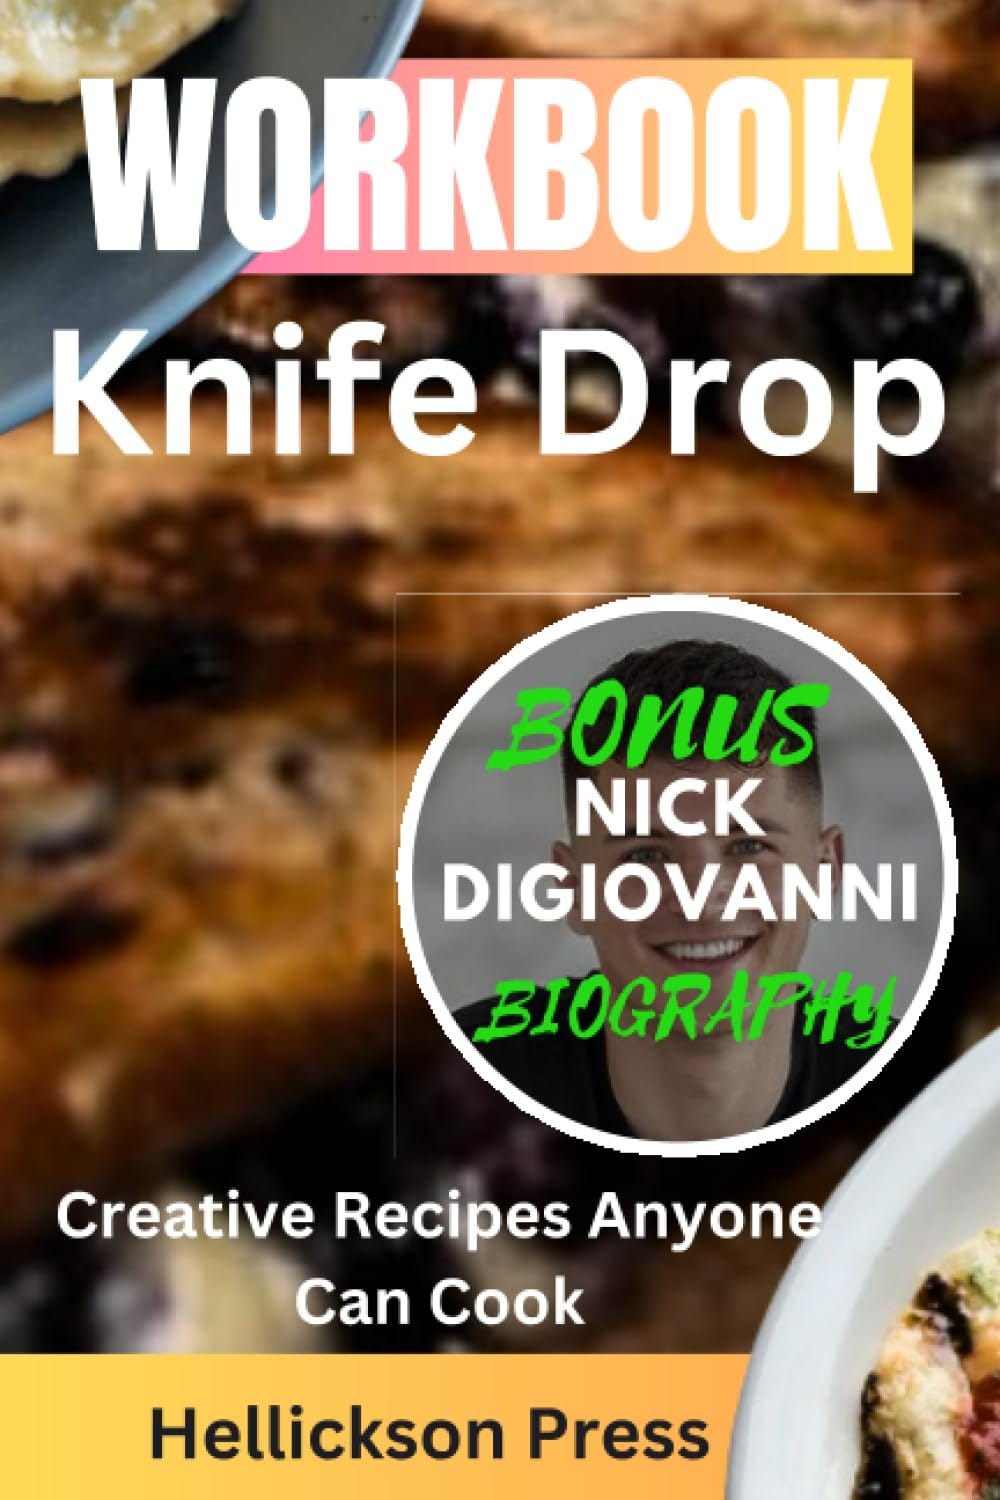 Knife Drop: Creative Recipes Anyone Can Cook (Signed Book) by Nick